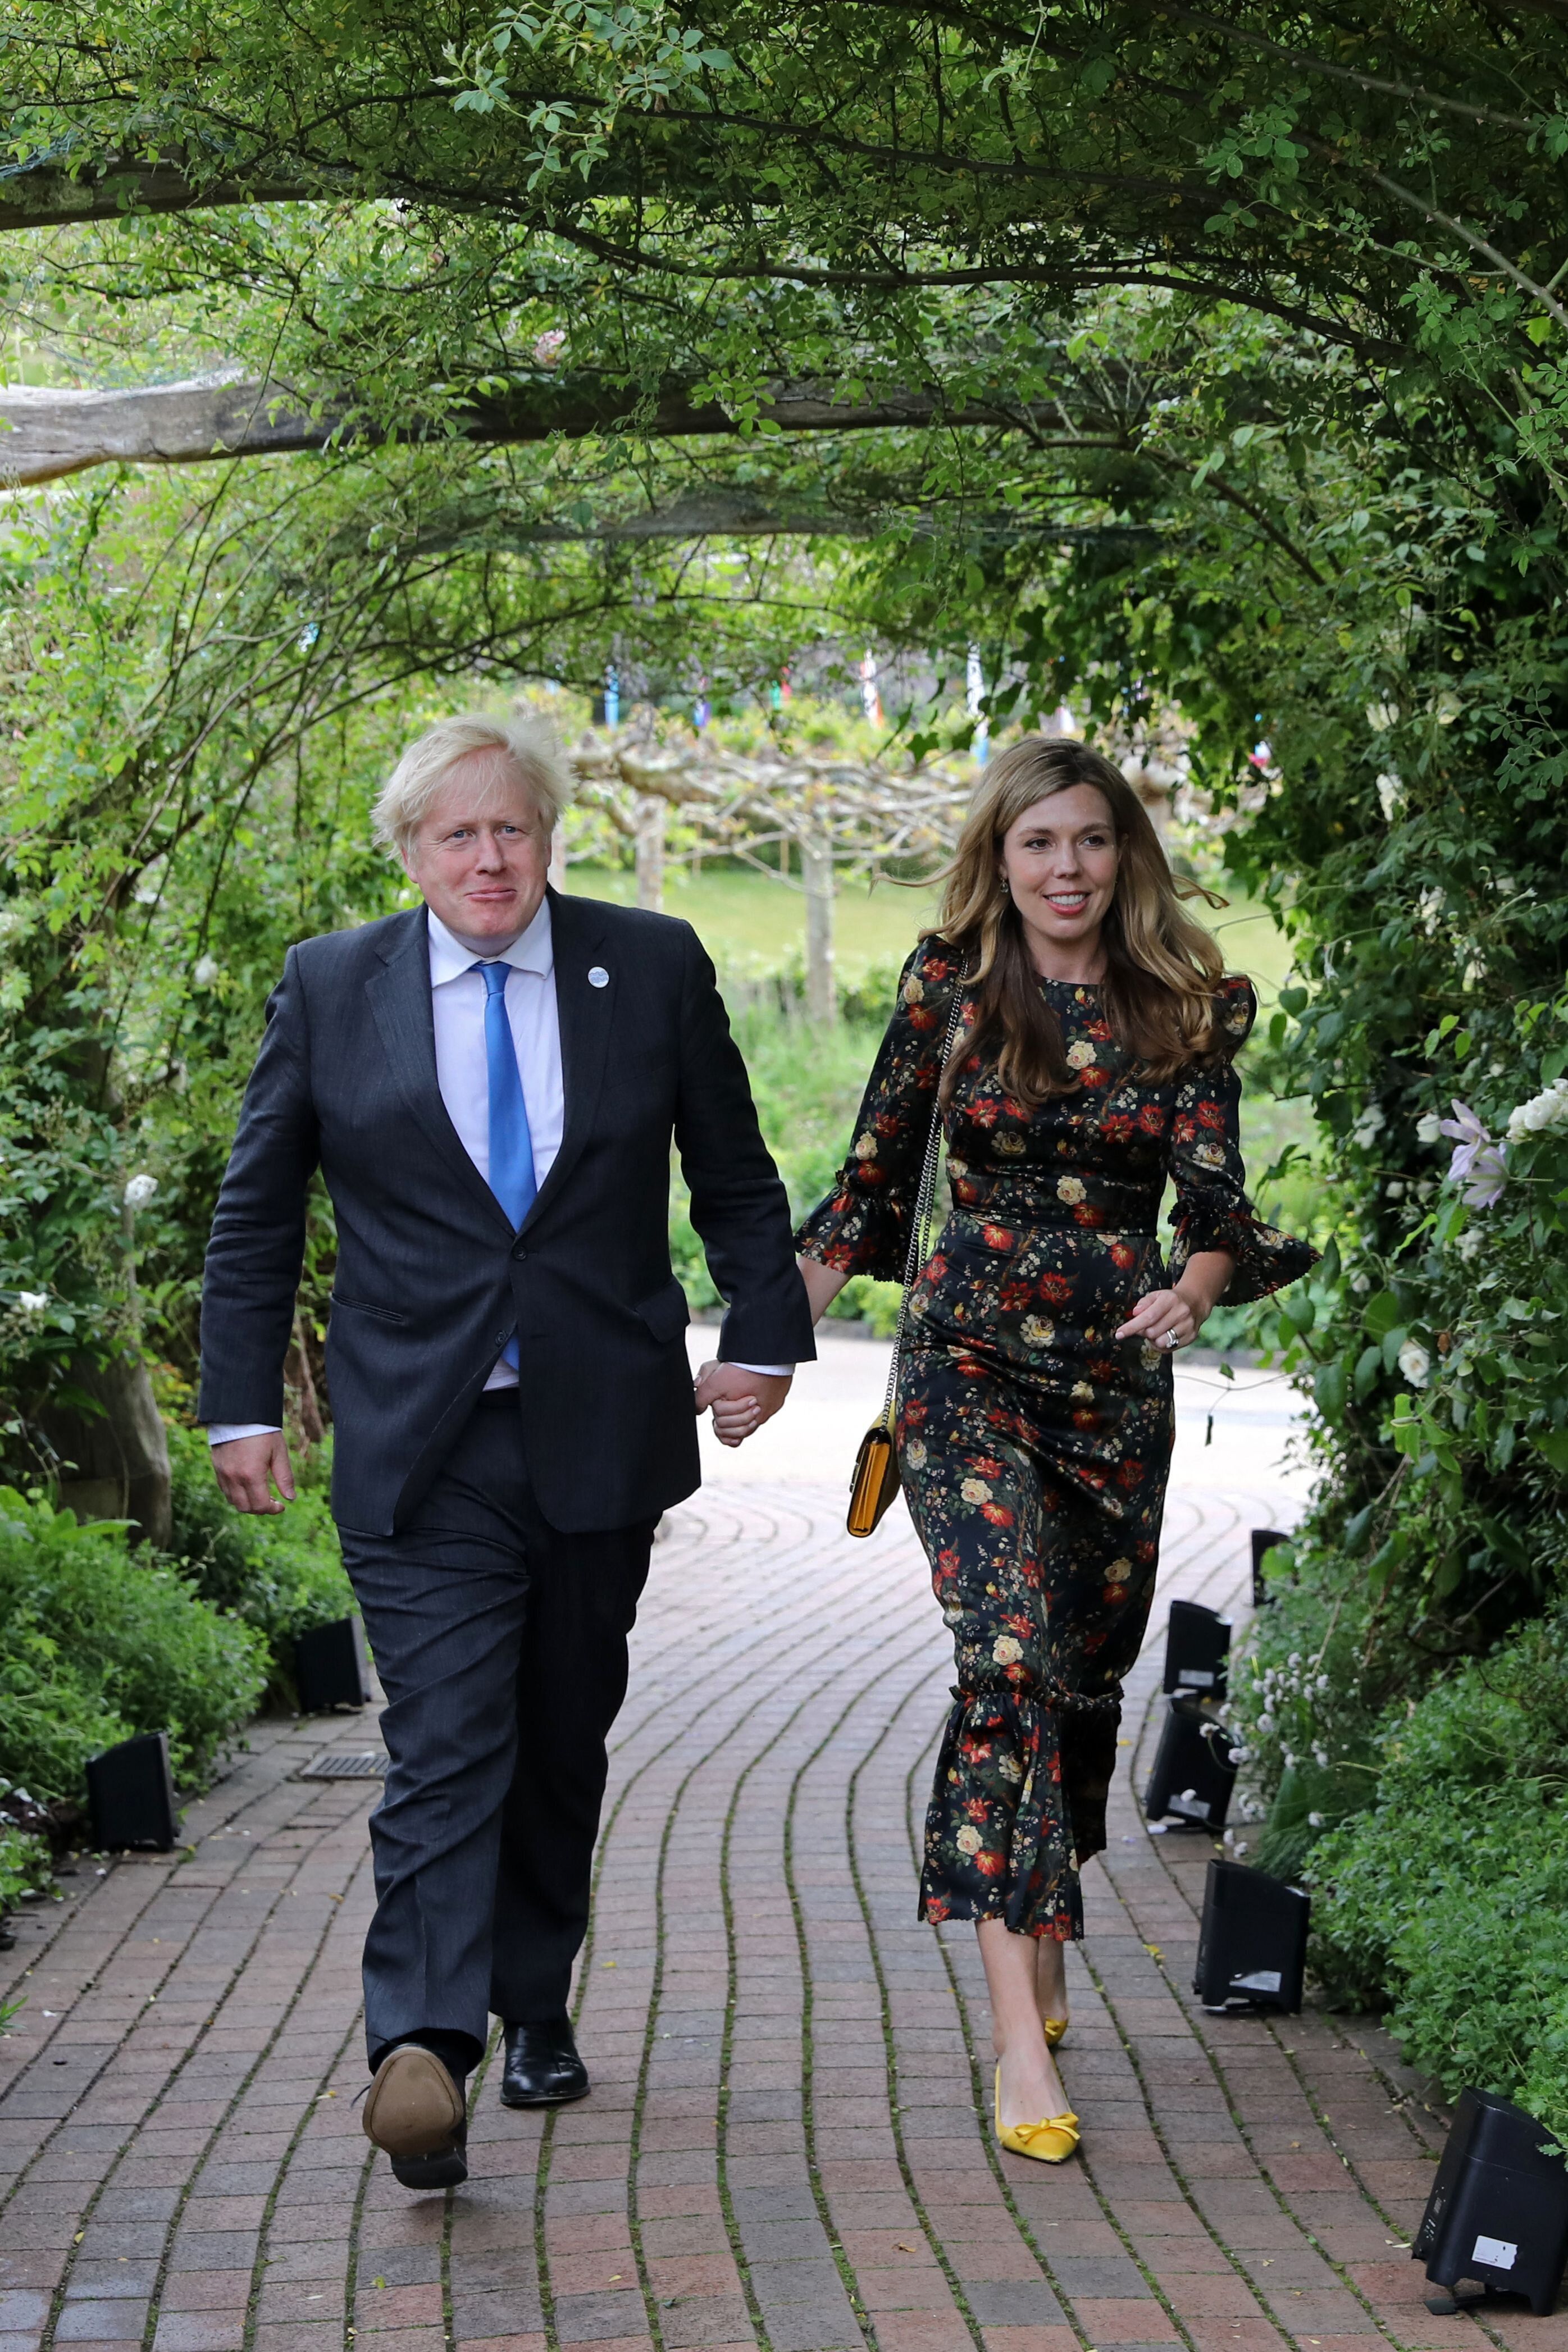 Prime Minister Boris Johnson and Carrie